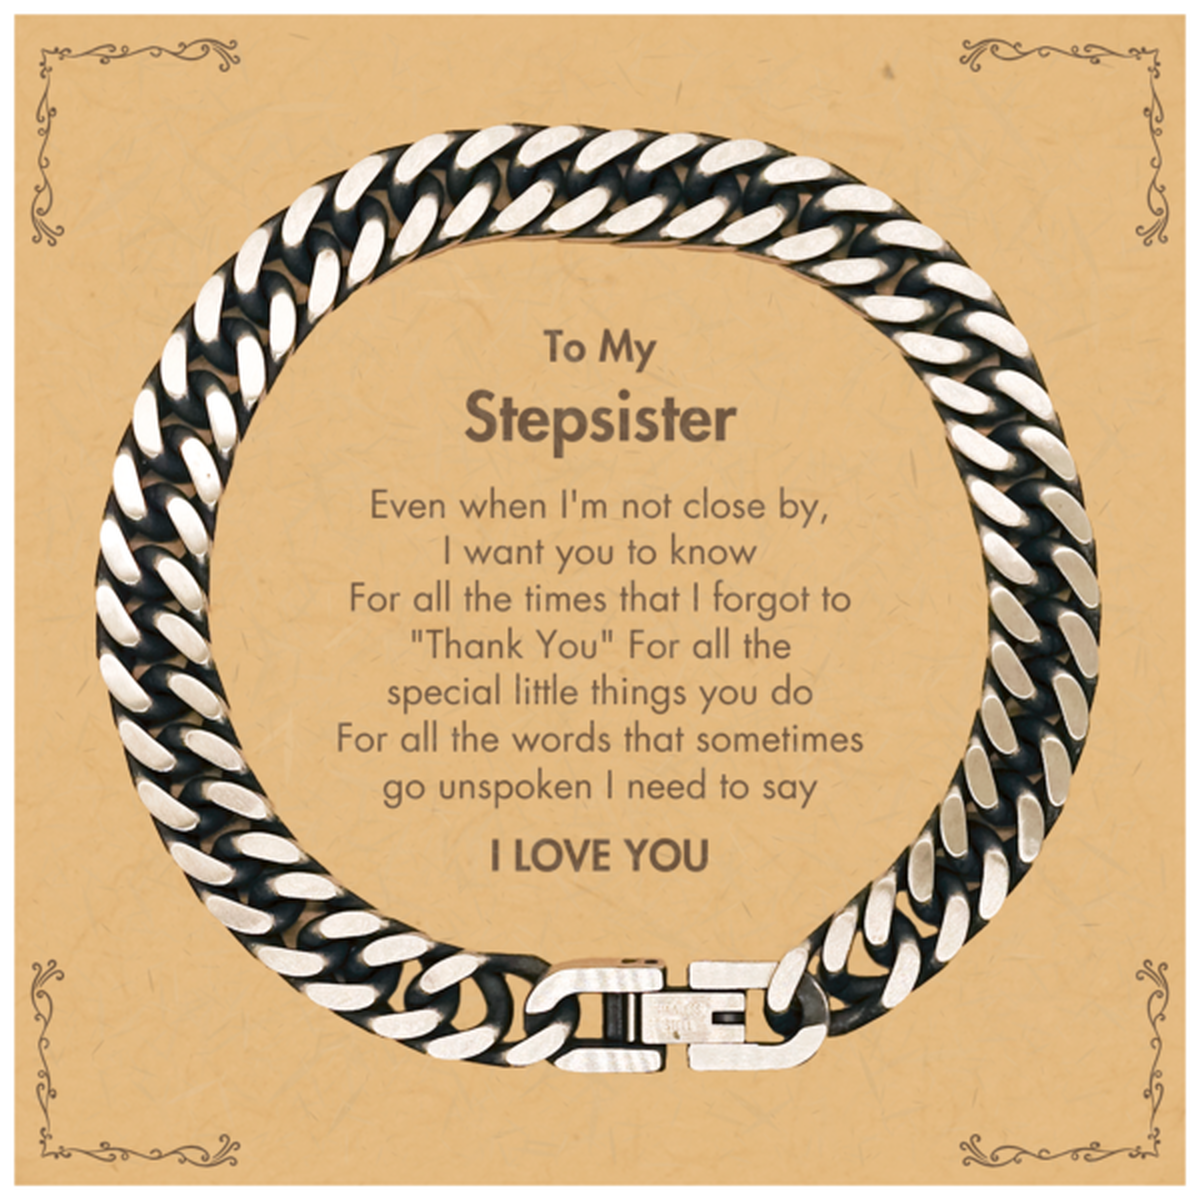 Thank You Gifts for Stepsister, Keepsake Cuban Link Chain Bracelet Gifts for Stepsister Birthday Mother's day Father's Day Stepsister For all the words That sometimes go unspoken I need to say I LOVE YOU